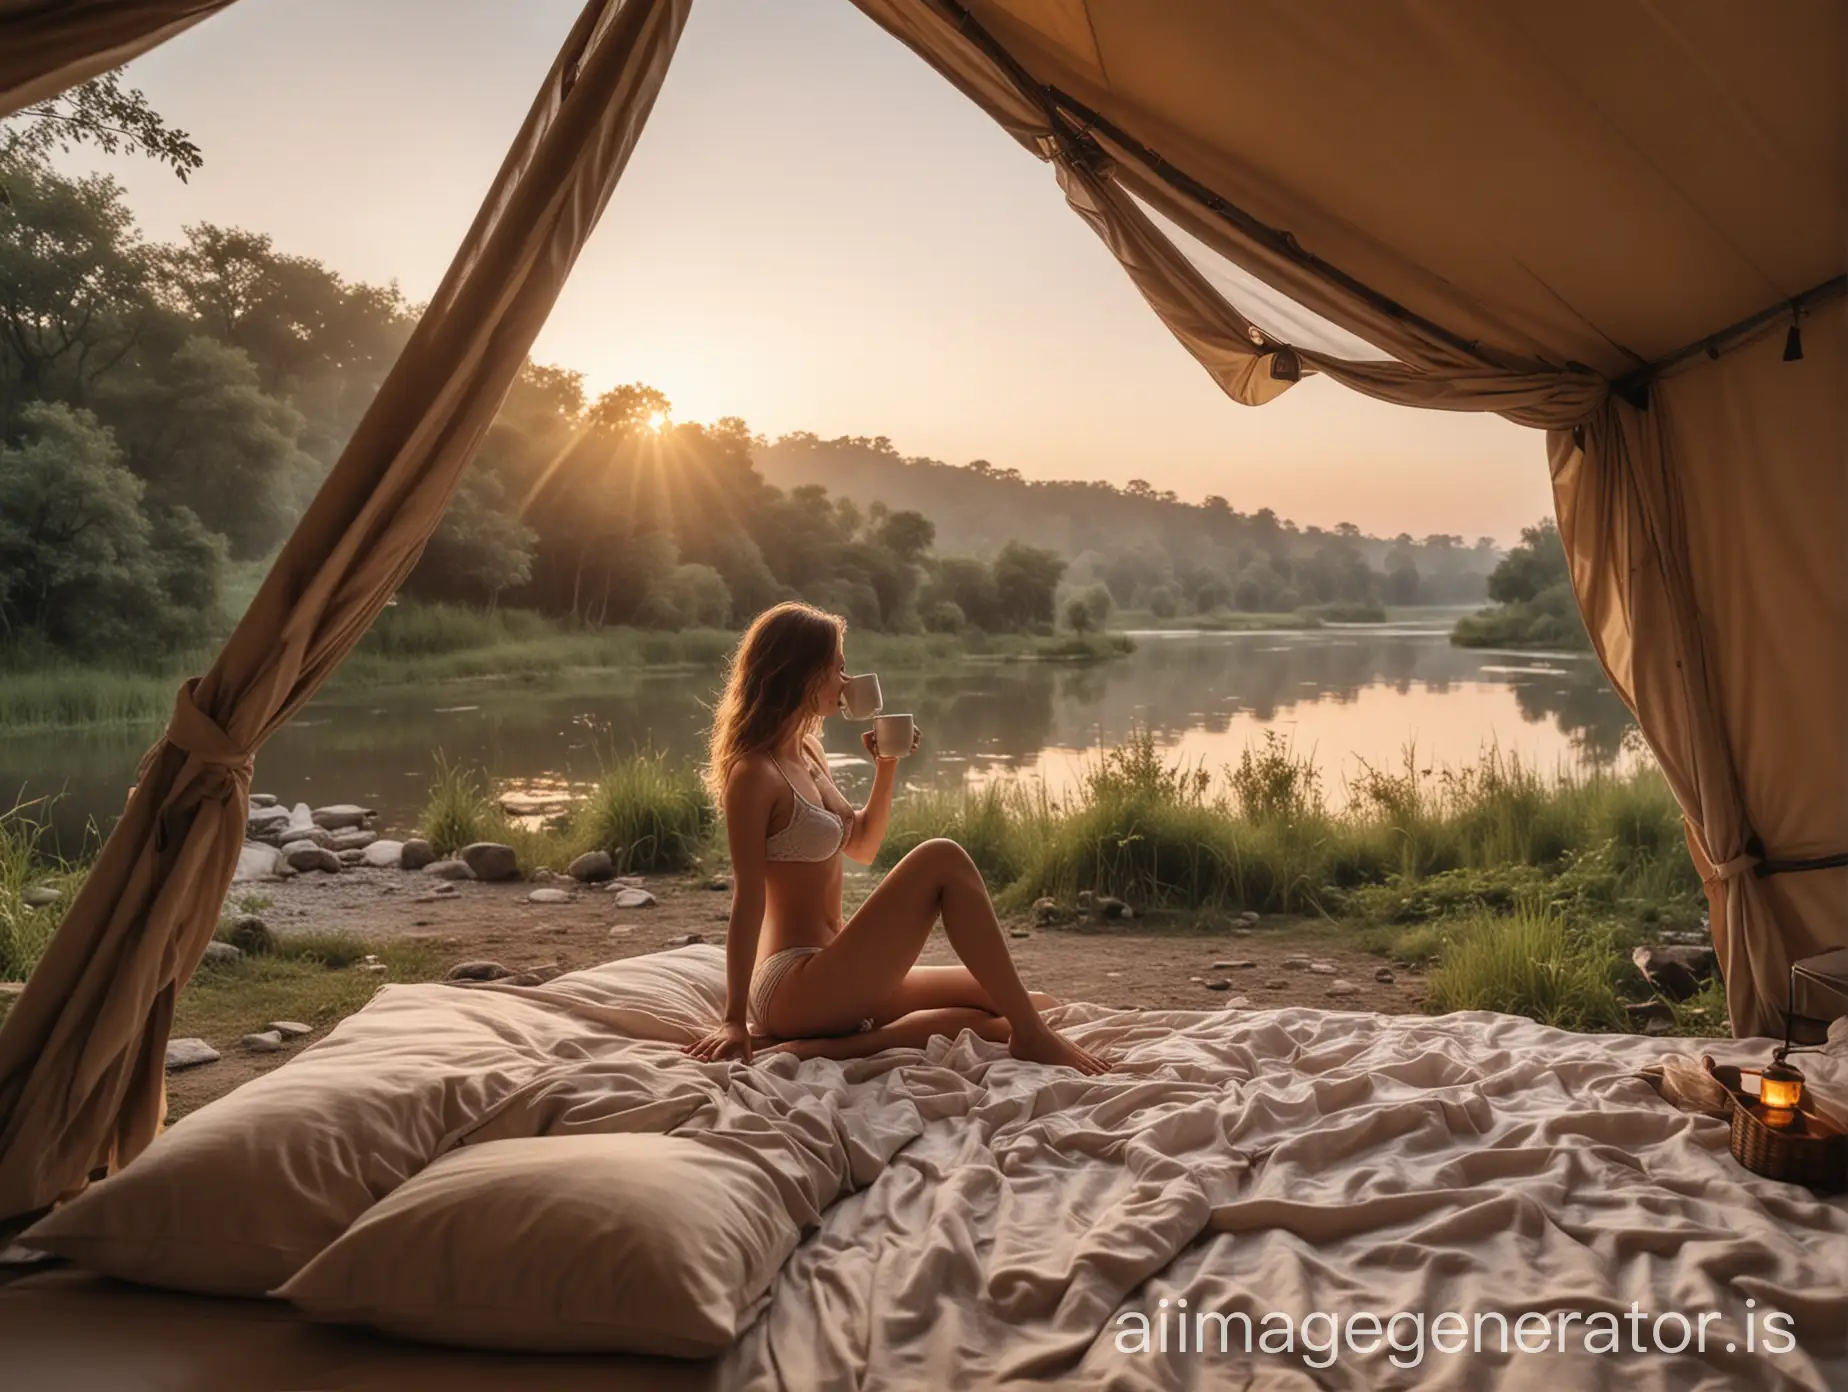 The most realistic photo taken with a professional camera. In the photo, a modern chicglamping tent with a view of nature, dawn, inside a young beautiful girl, in her underwear, just woke up, drinking coffee, enjoying a wonderful view of the wildlife, next to the river